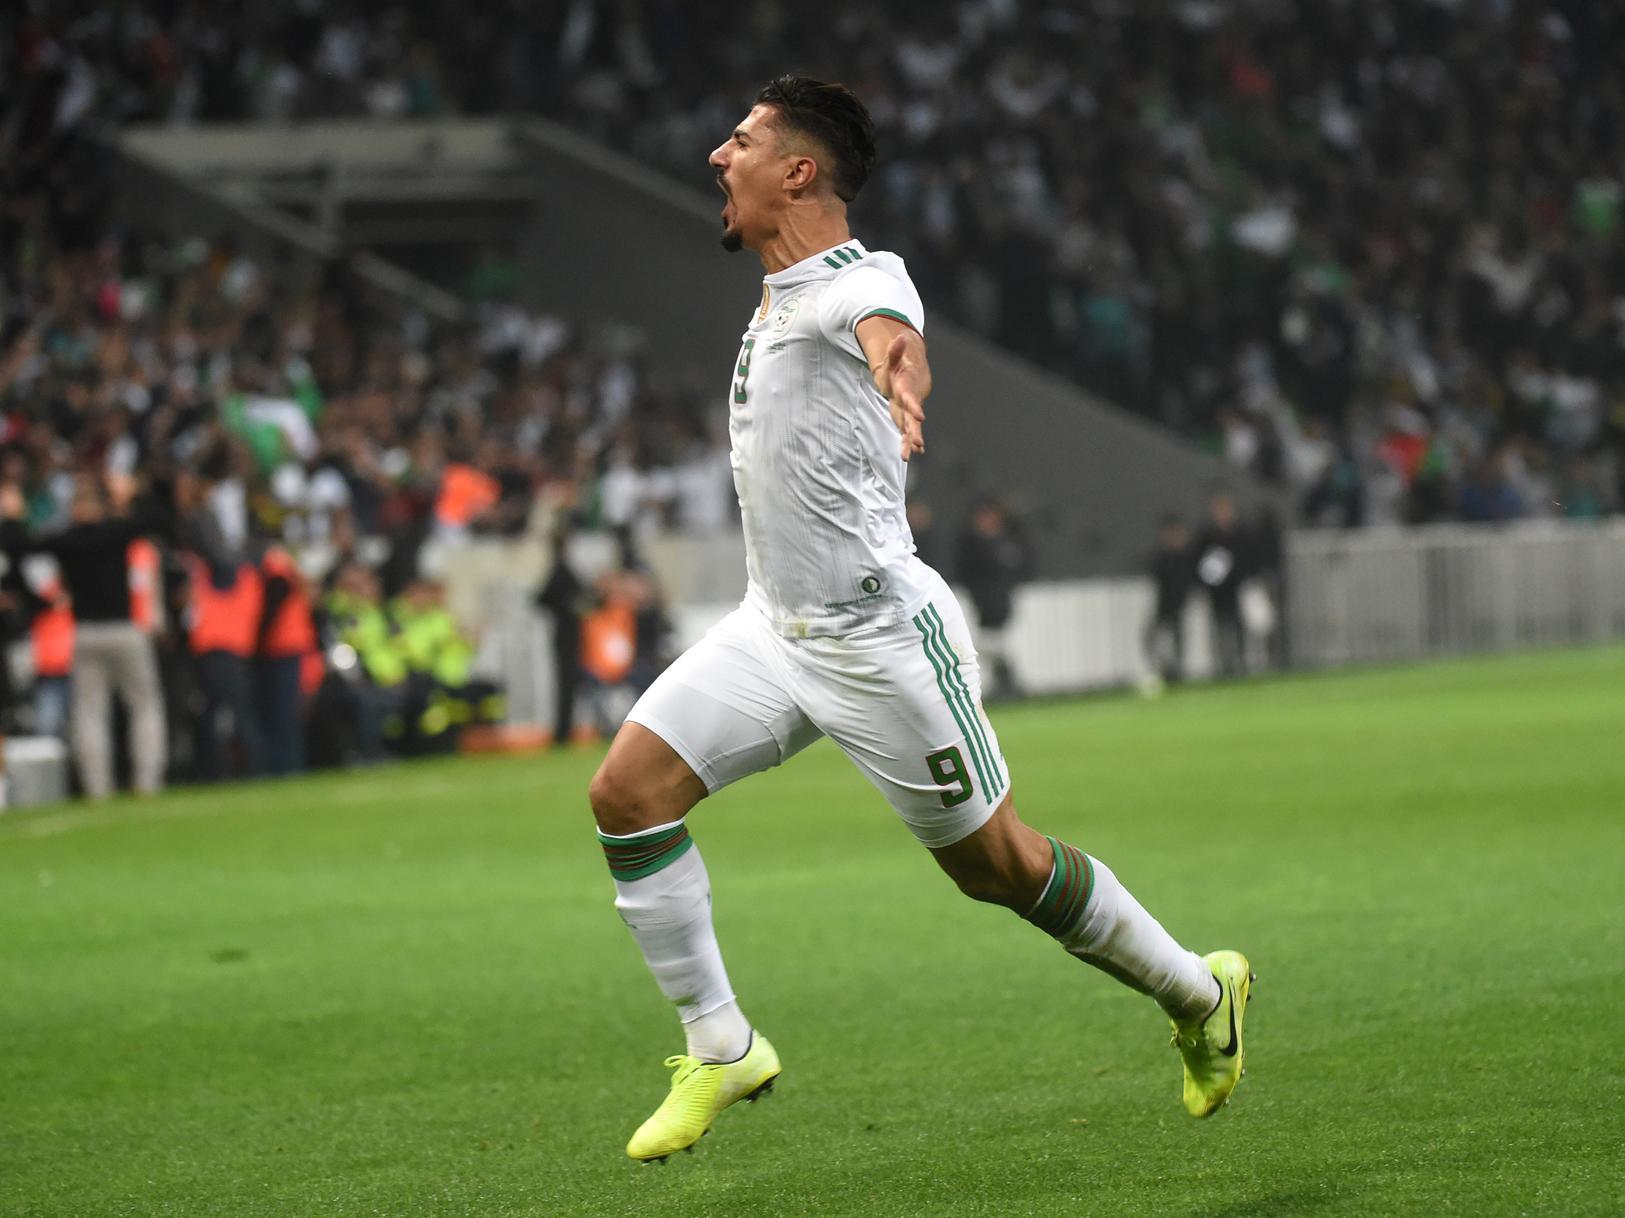 Algerian goal machine Baghdad Bounedjah, who has netted a stunning 123 goals in just over four seasons for Al Sadd, has claimed he's enjoying playing in the Middle East, amid links with Leeds United. (HITC)